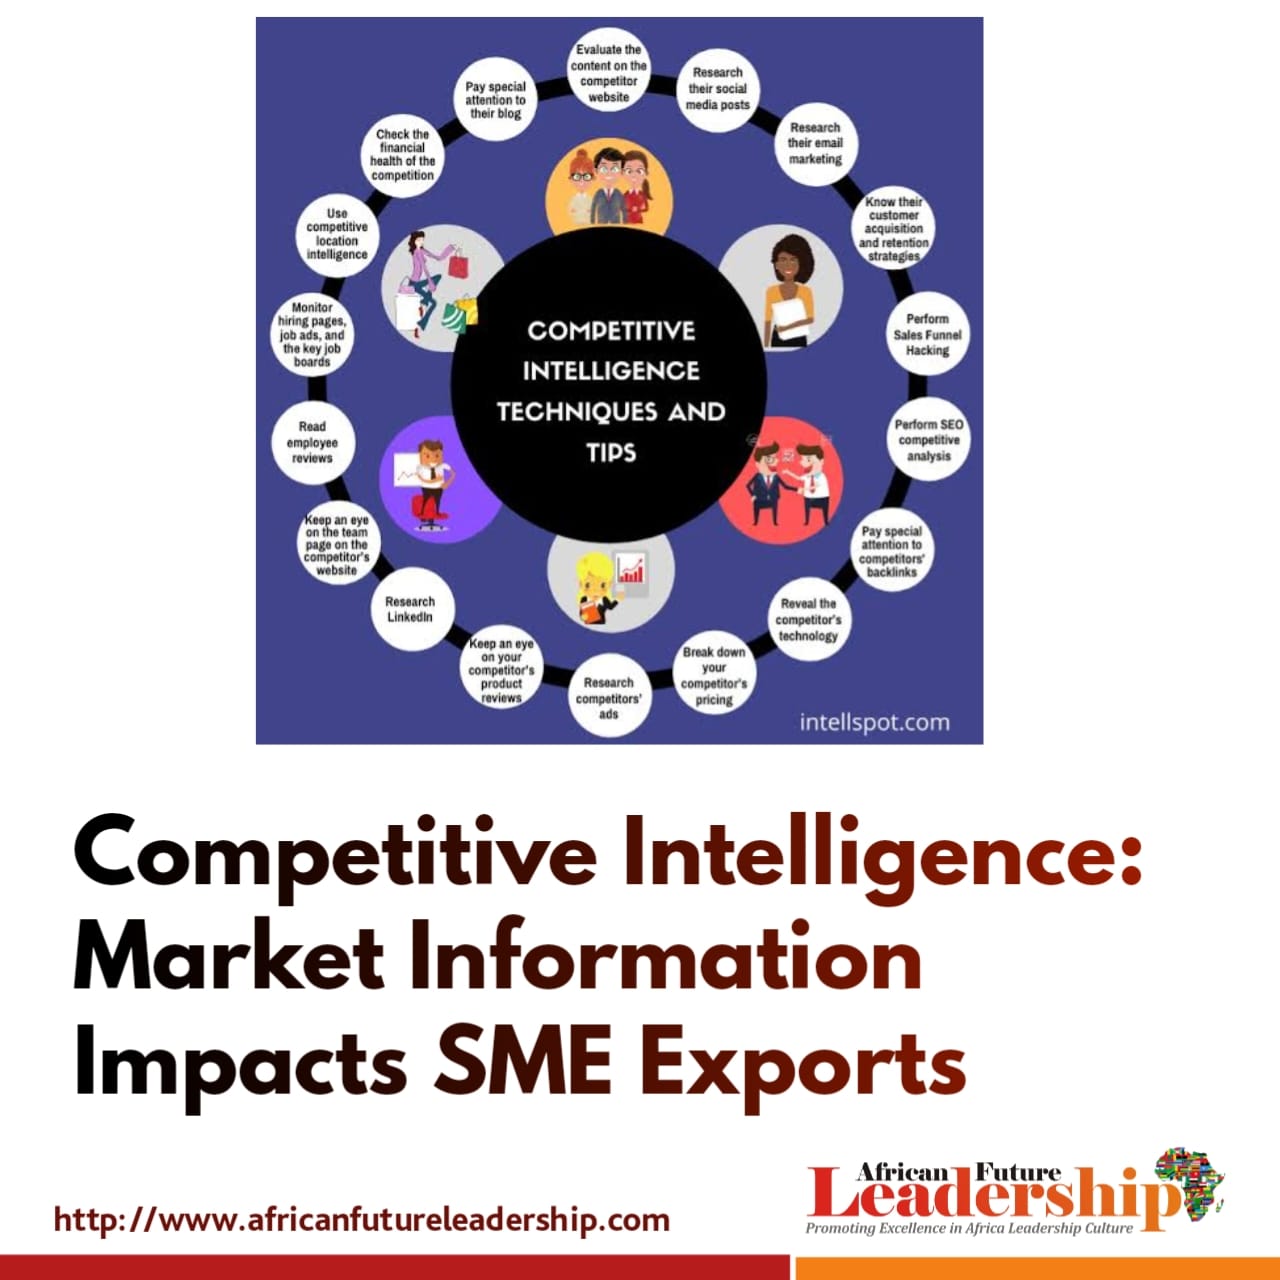 Competitive Intelligence: Market Information Impacts SME Exports